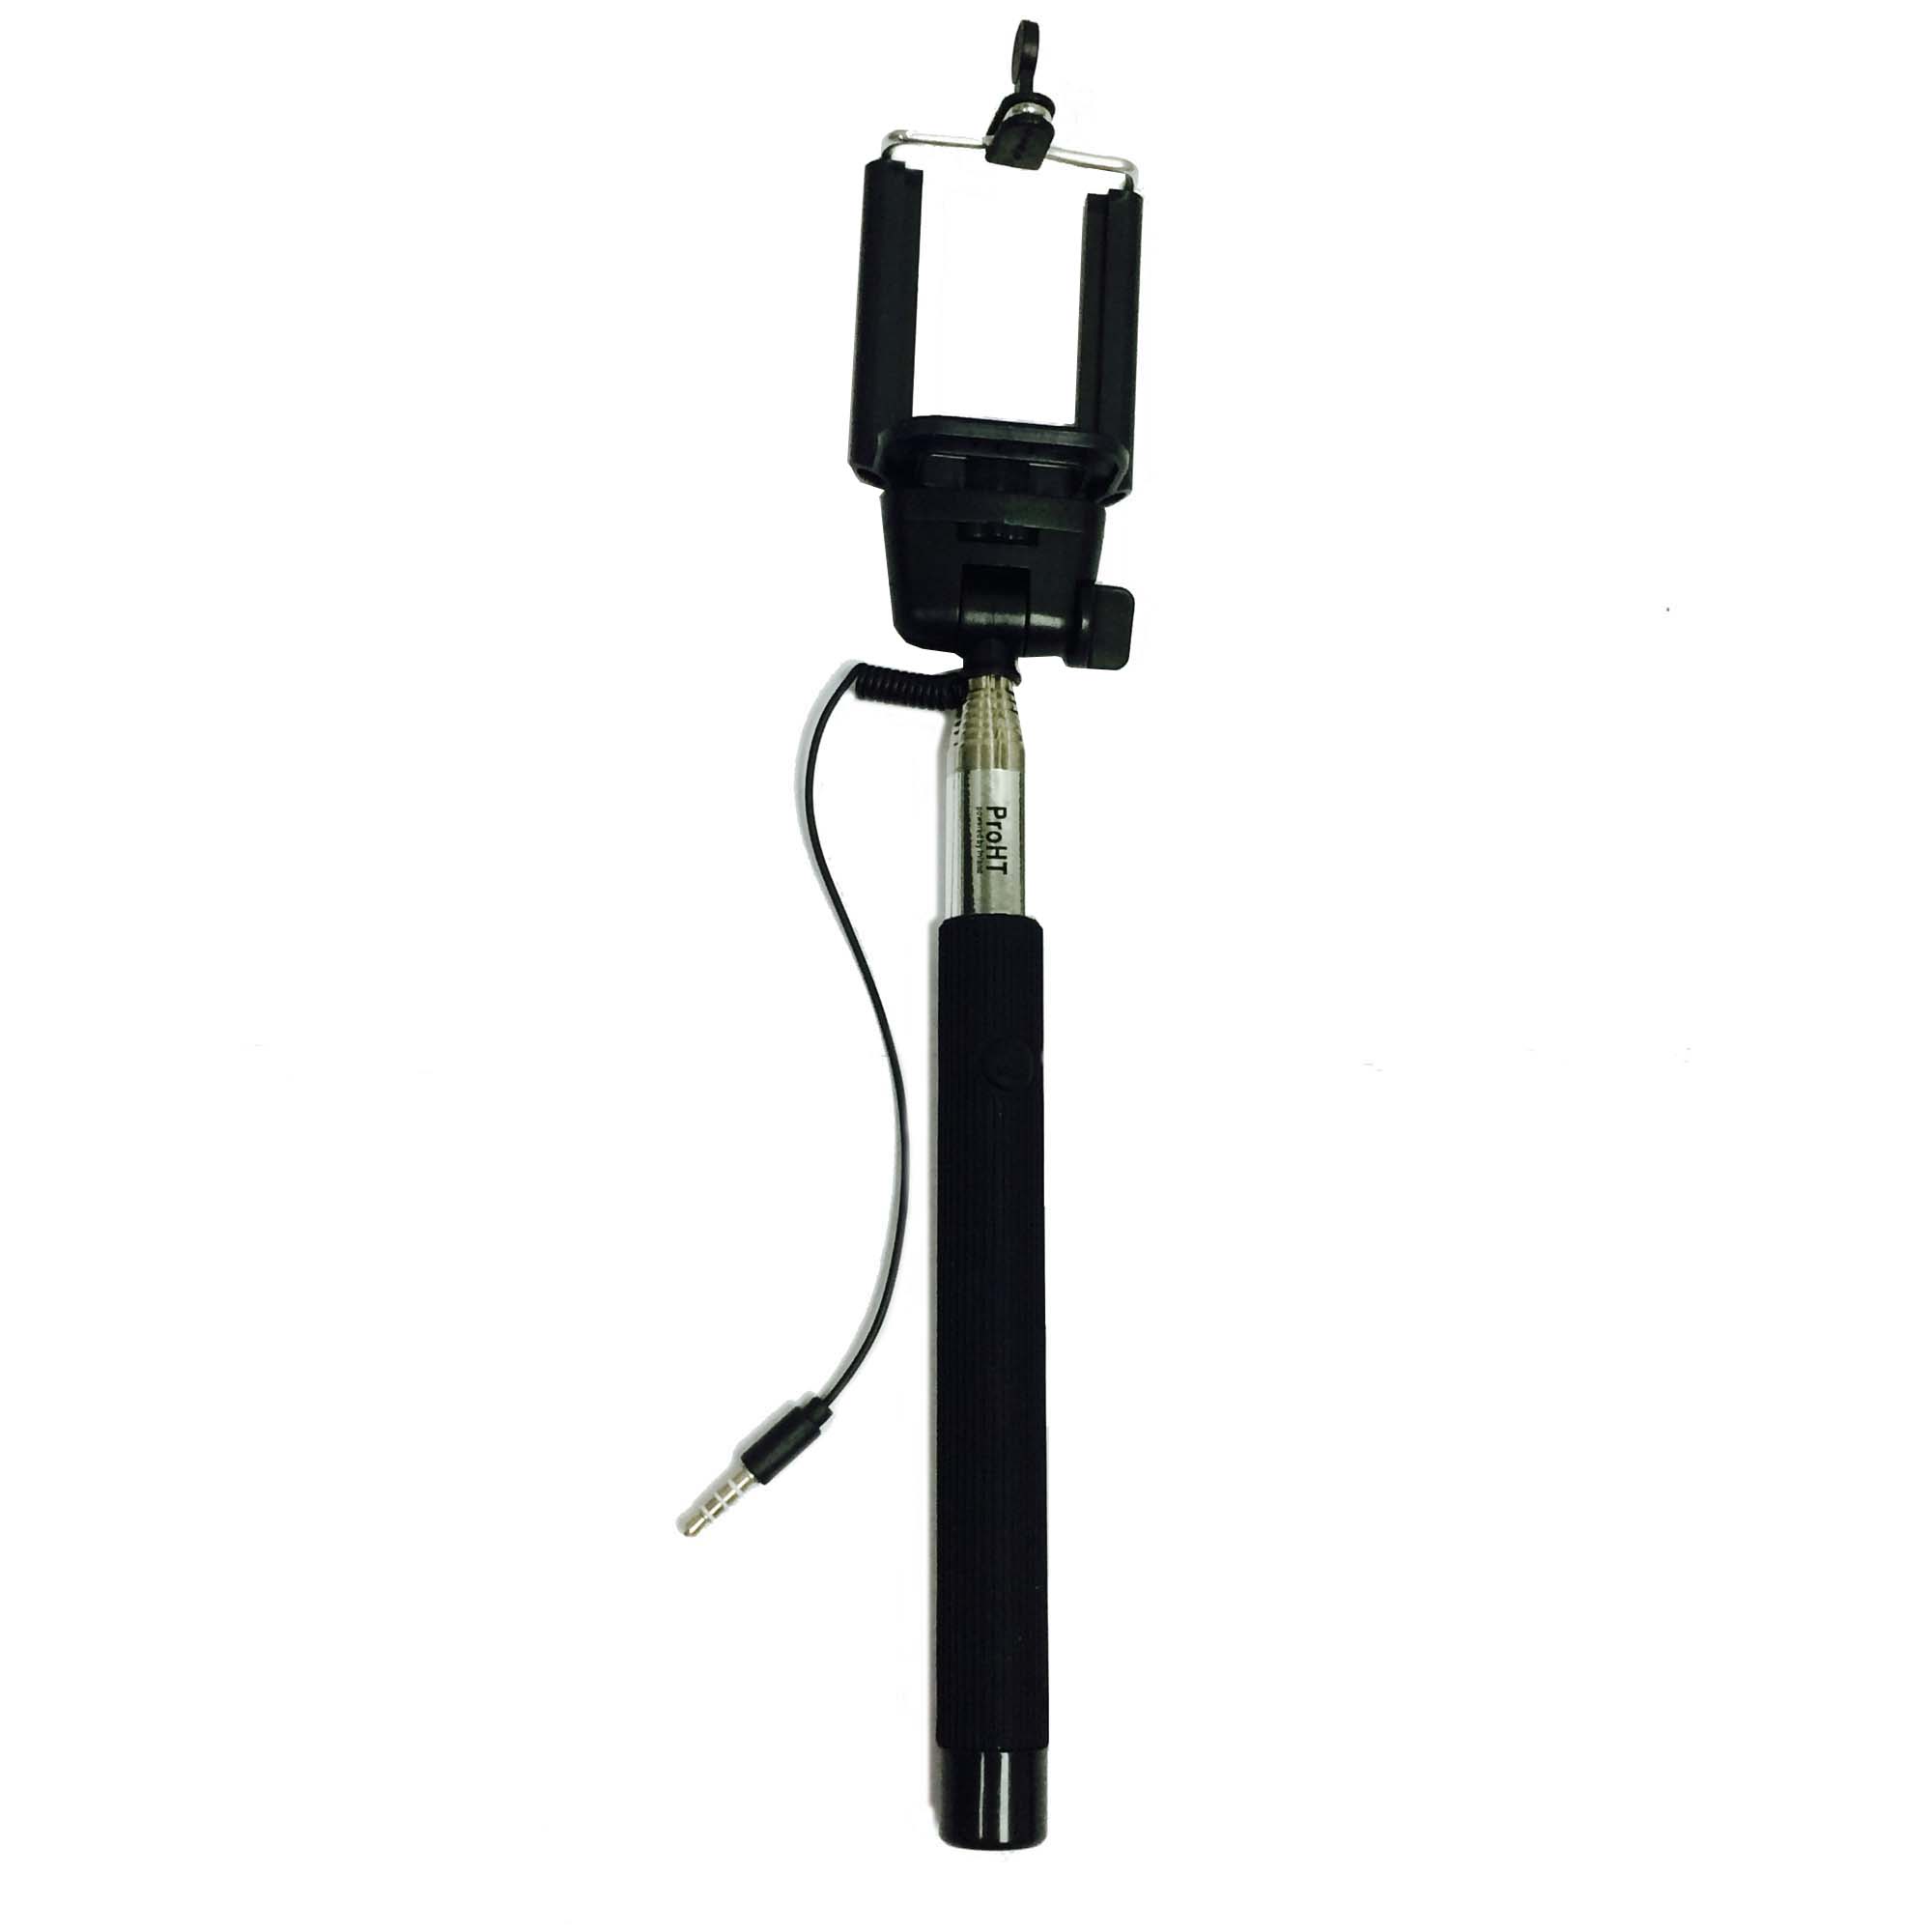 INLAND PRODUCTS ProHT 02523 Wired Remote Selfie Stick - Black